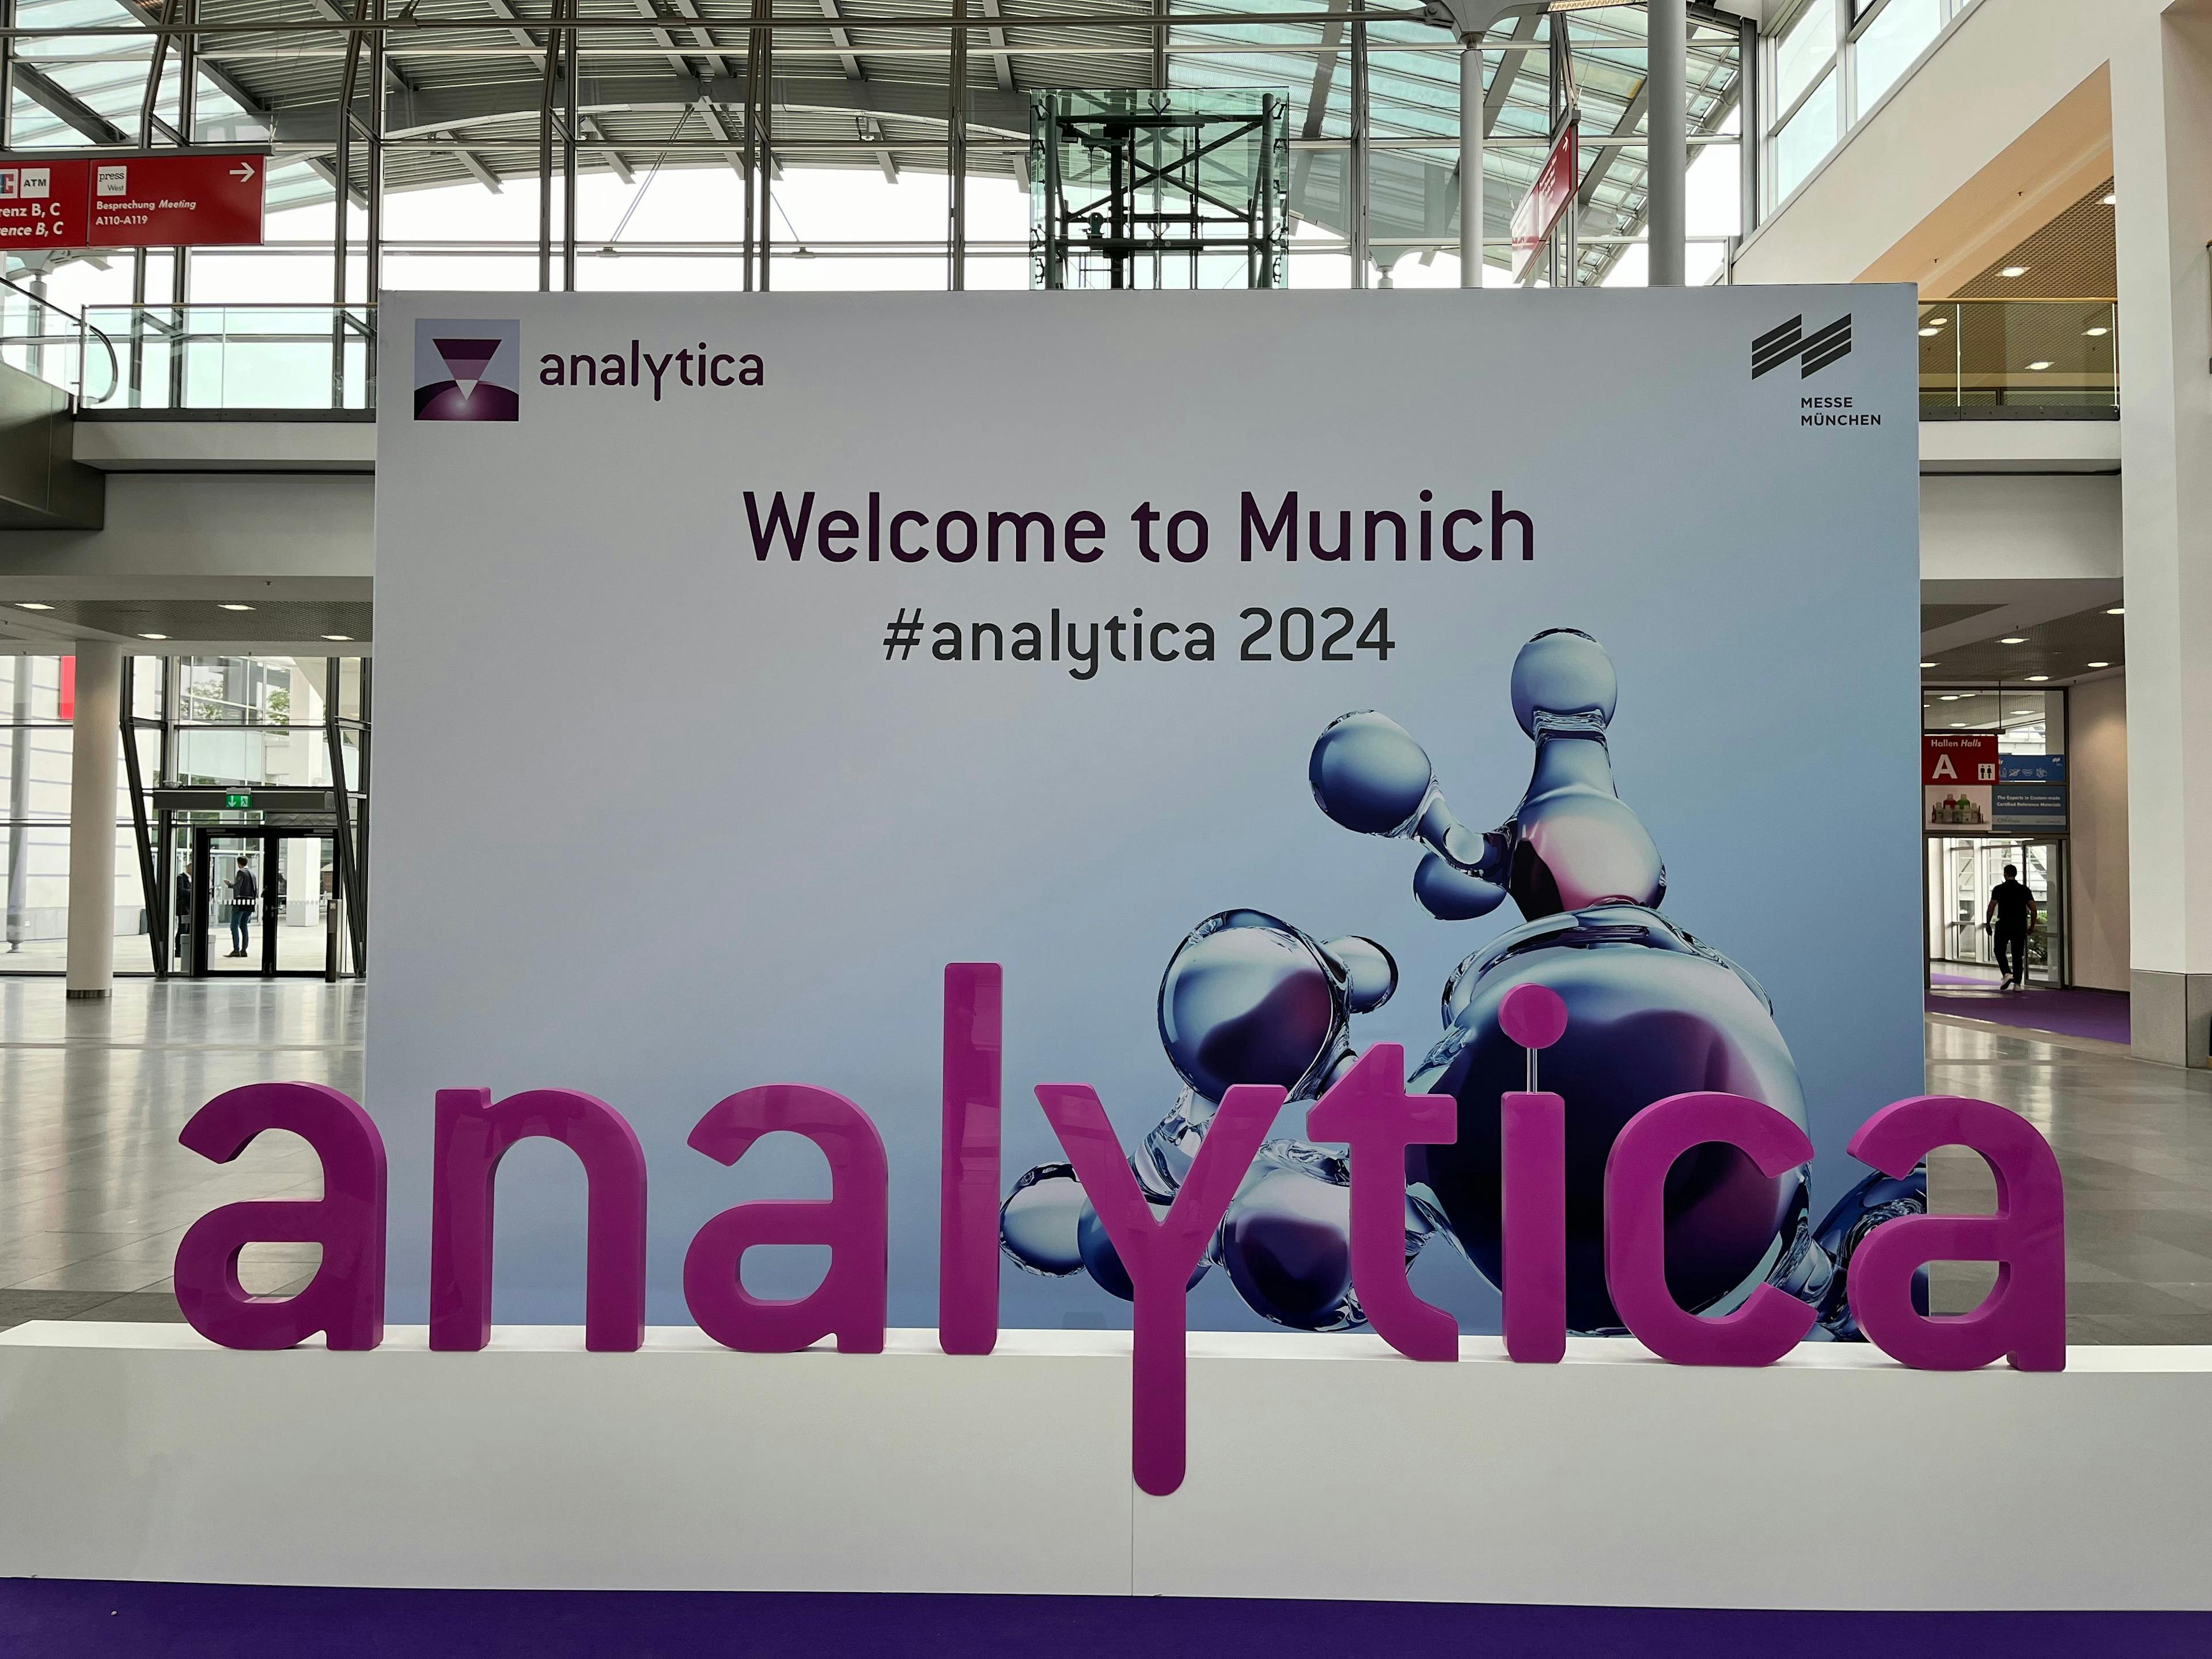 12 New Laboratory Products Showcased at Analytica 2024